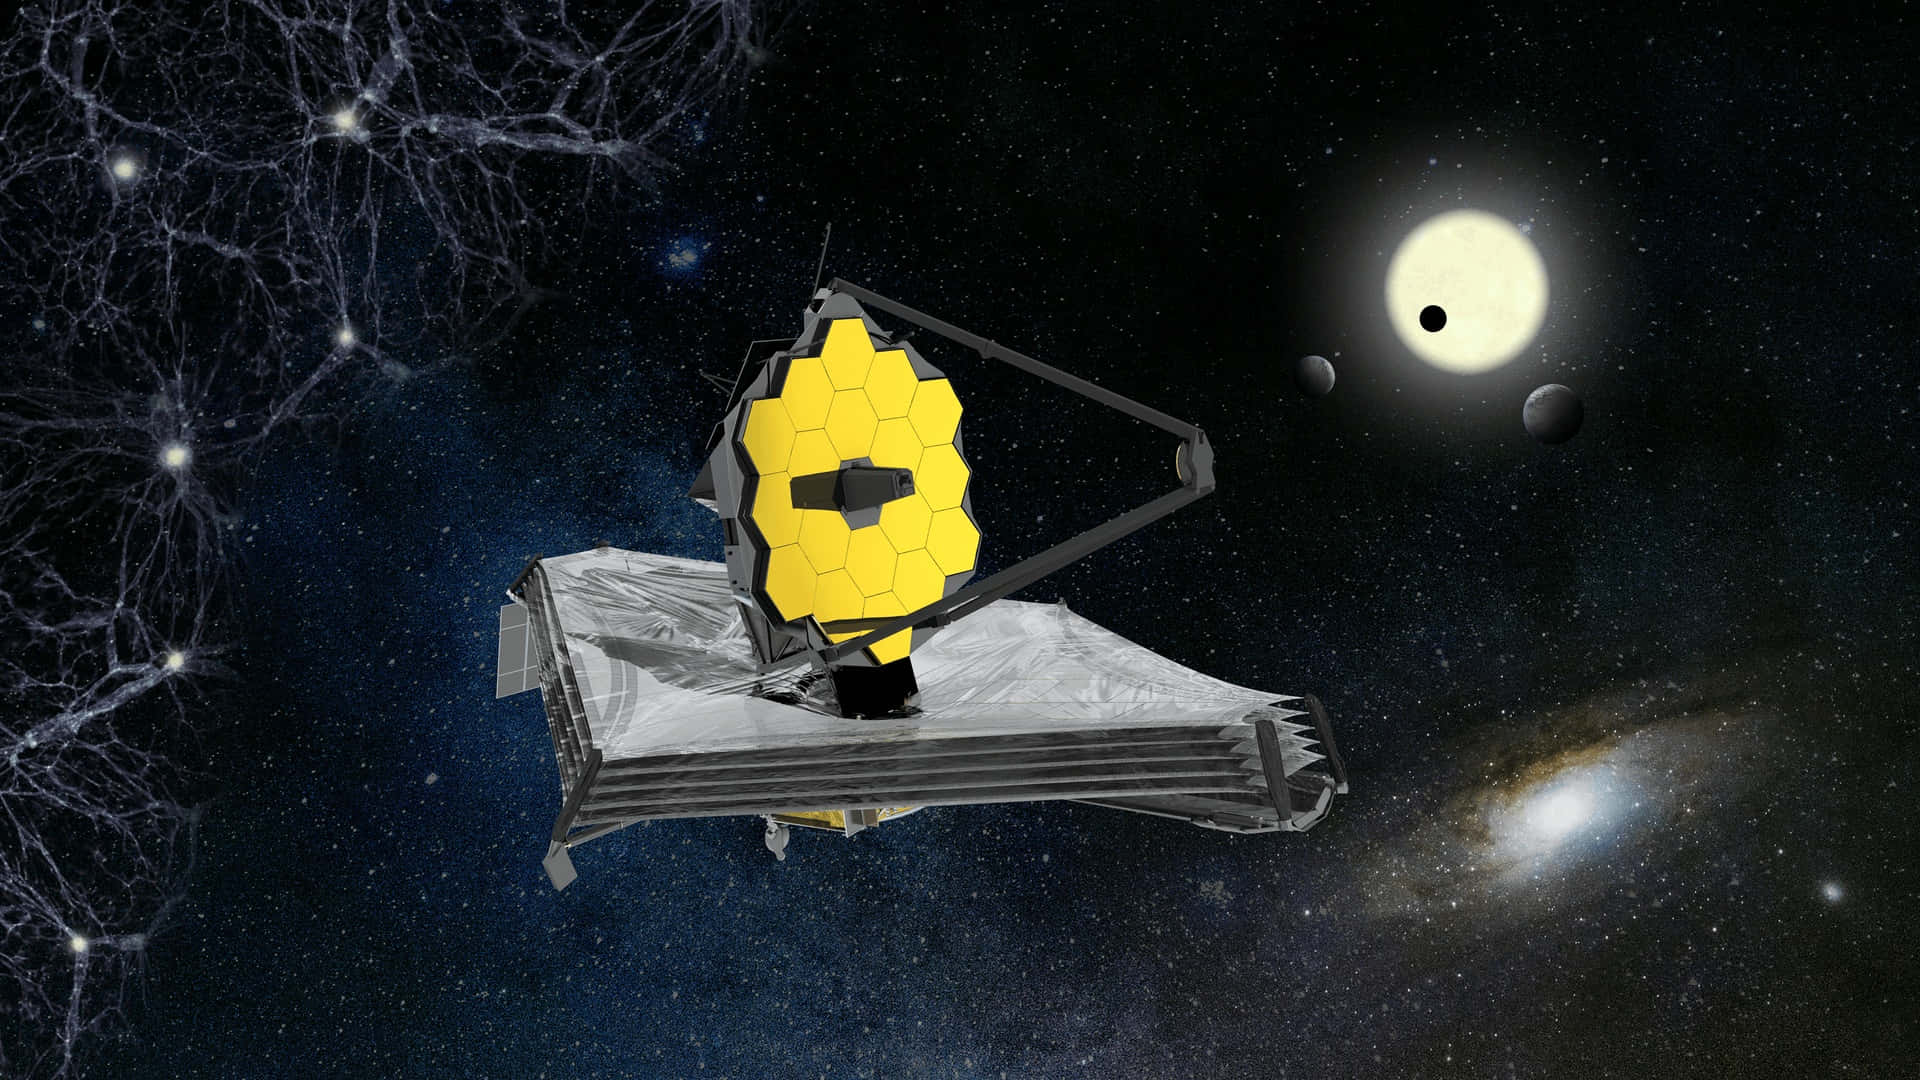 Marvelous View of the James Webb Space Telescope